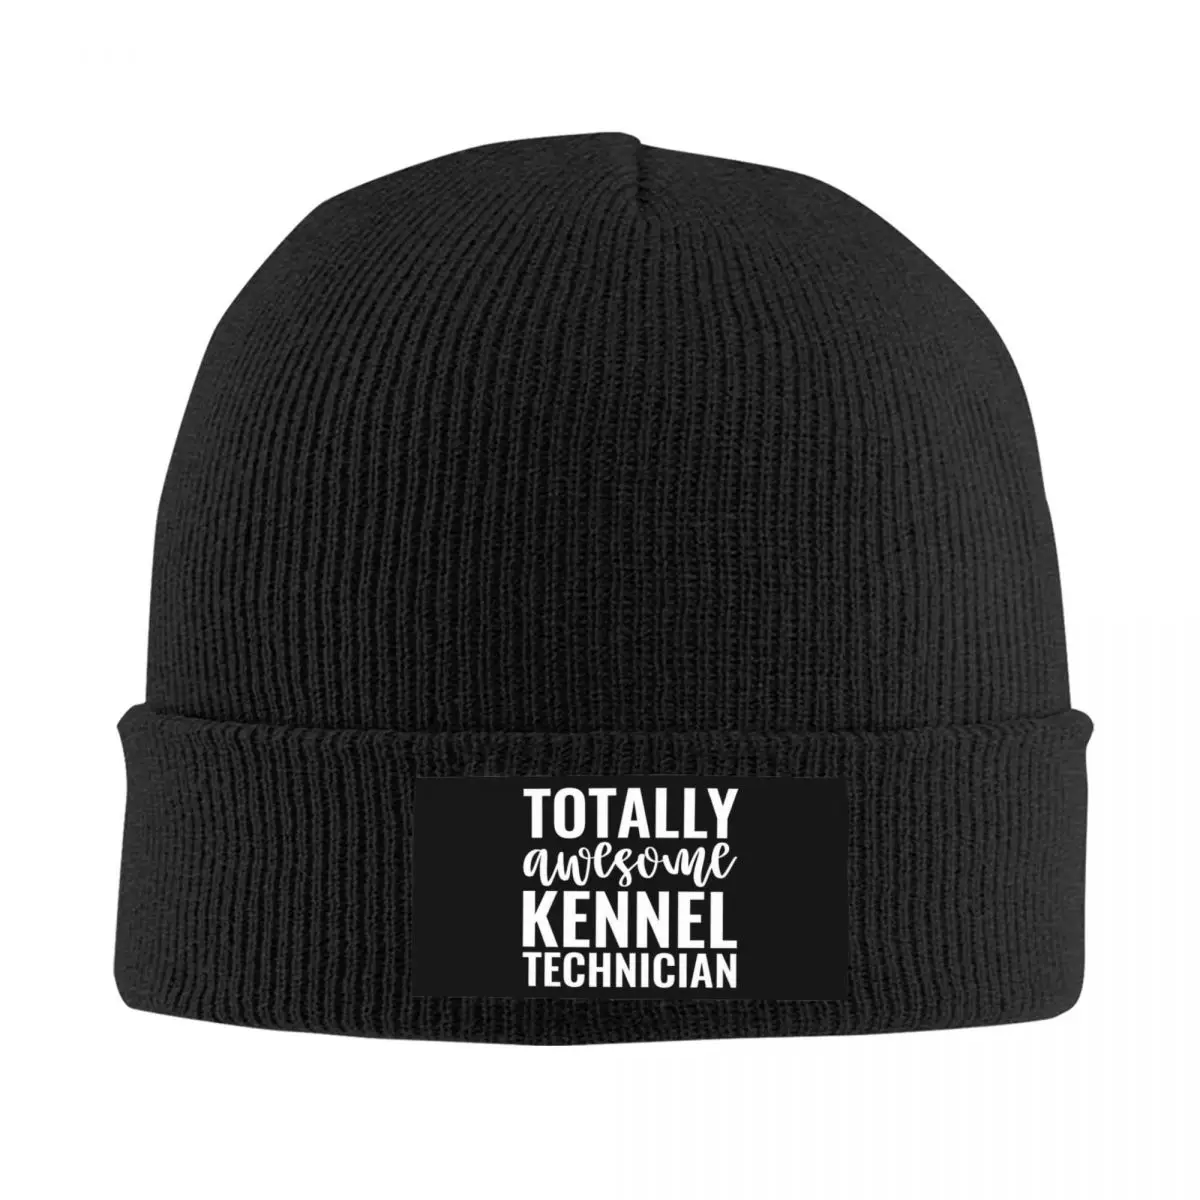 

Totally Awesome Kennel Technician Knitted Hat 100% Acrylic For Winter Valentine's Day Gift